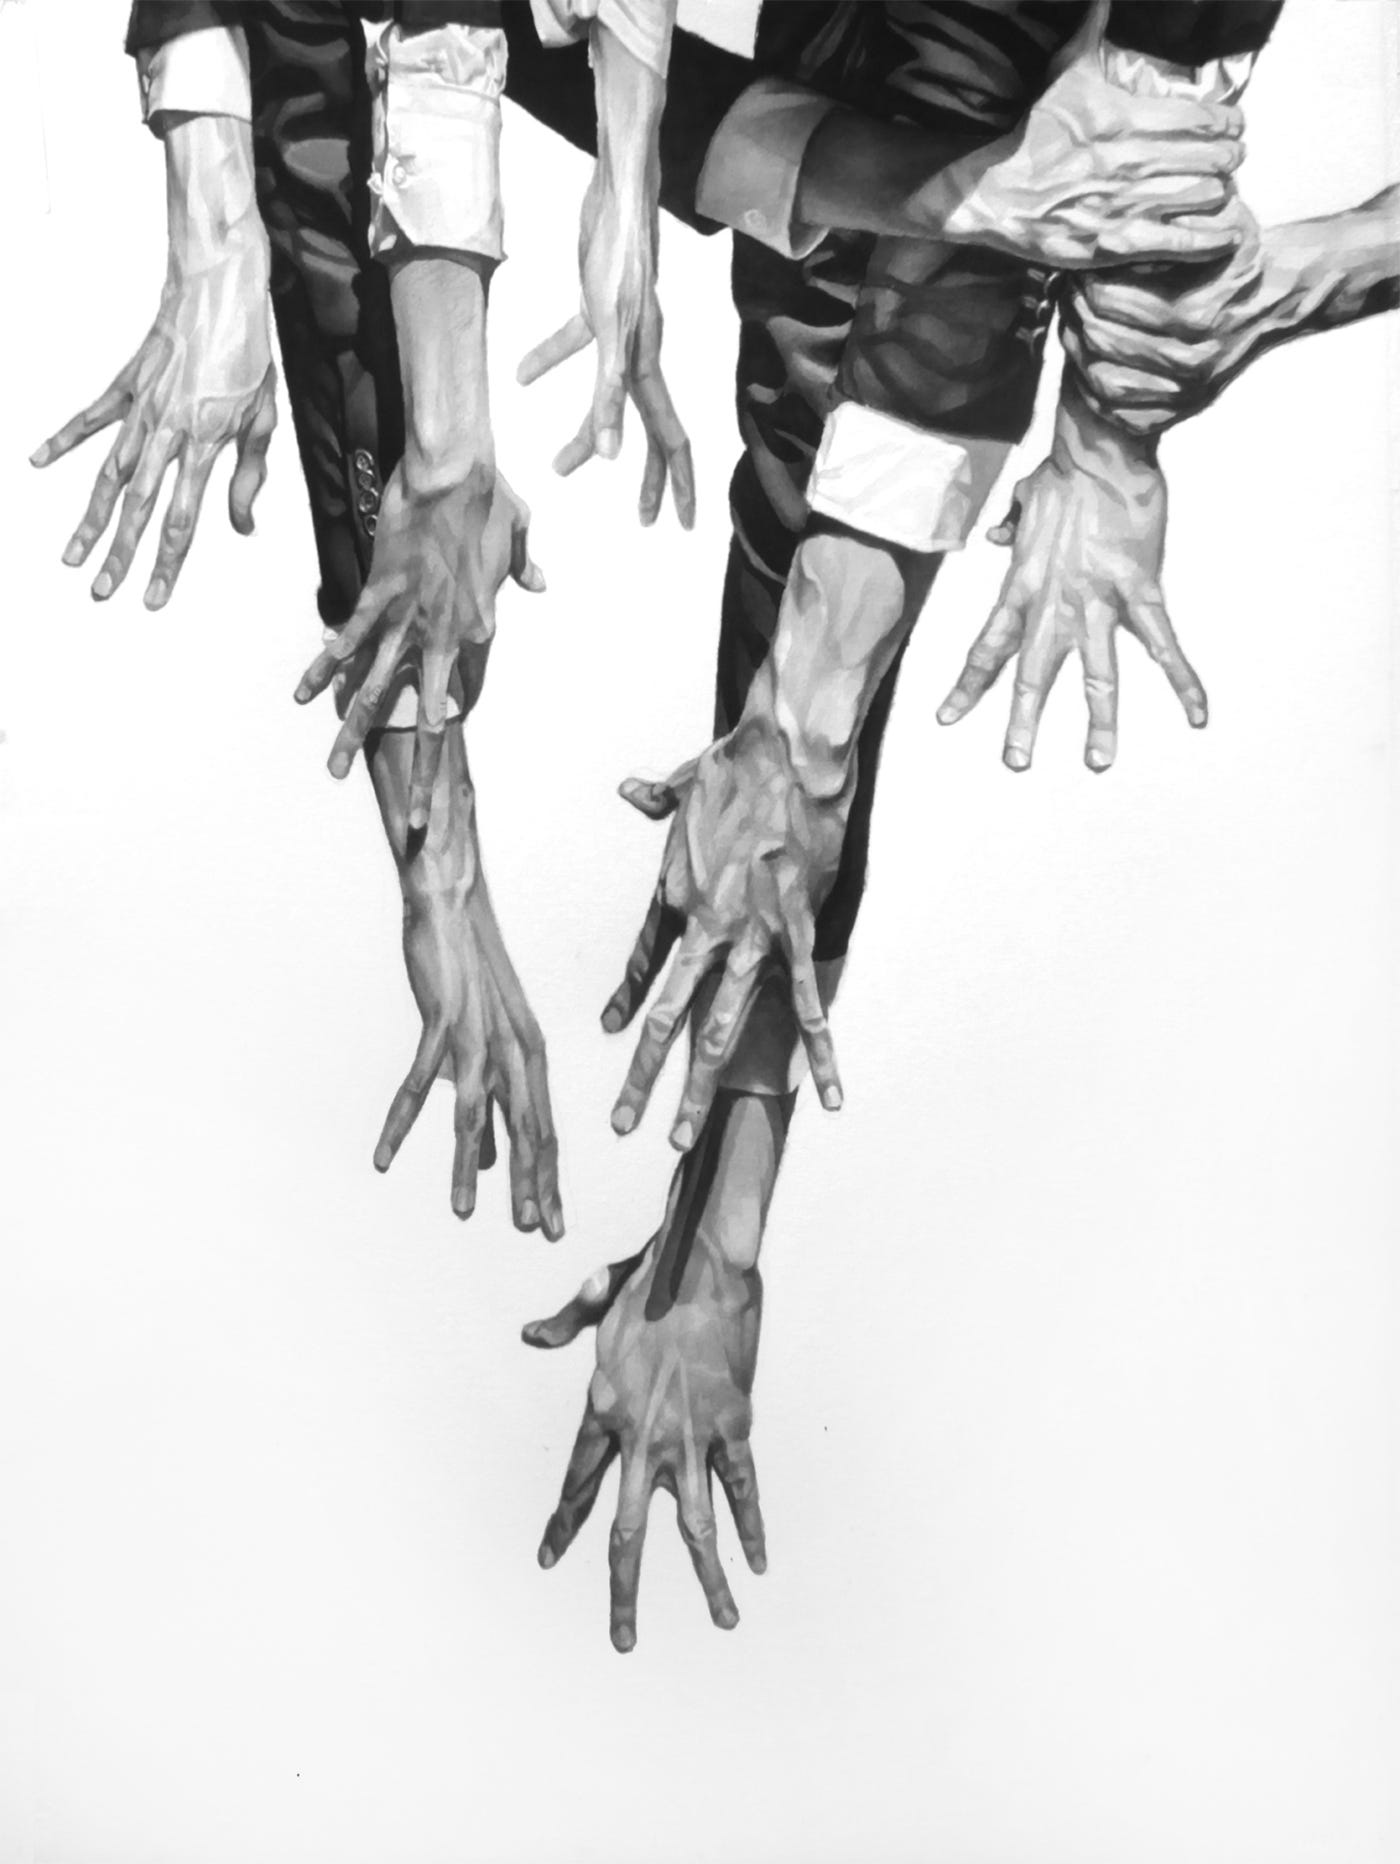 The Grasping Hand on Behance